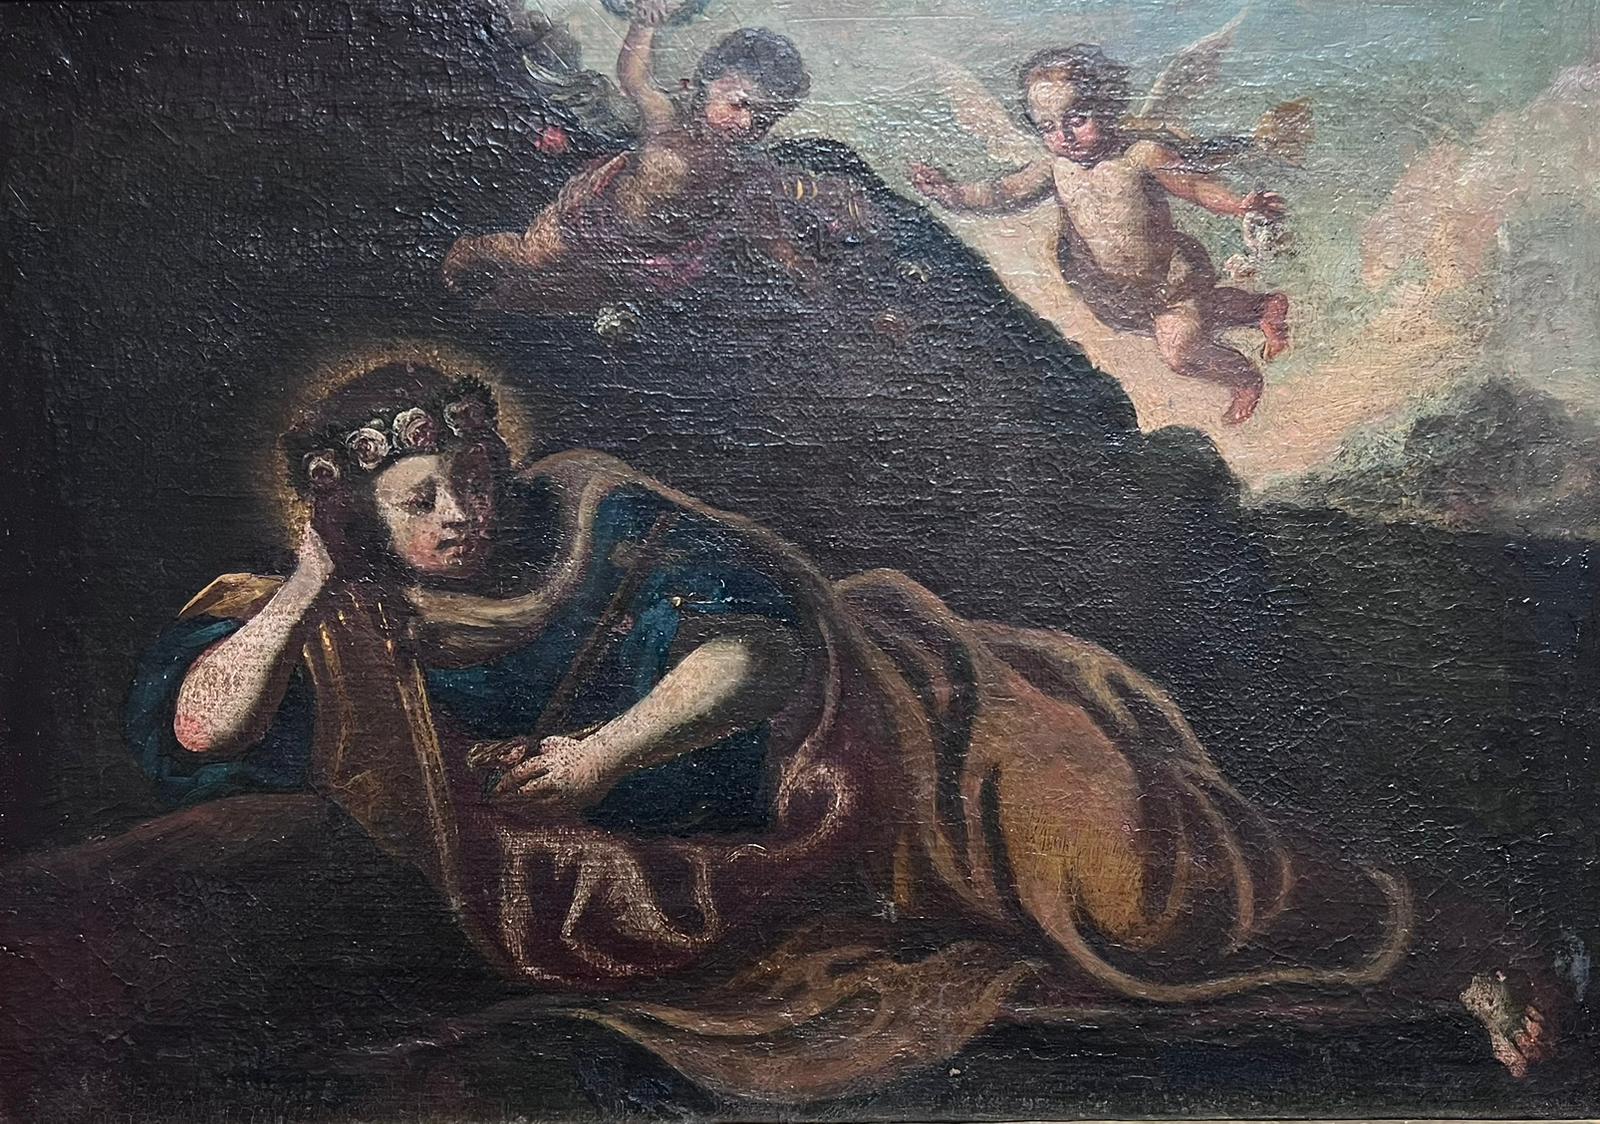 Cherubim Hovering Woman in Wilderness 17th Century Italian Old Master Oil  - Painting by Italian 17th Century Old Master